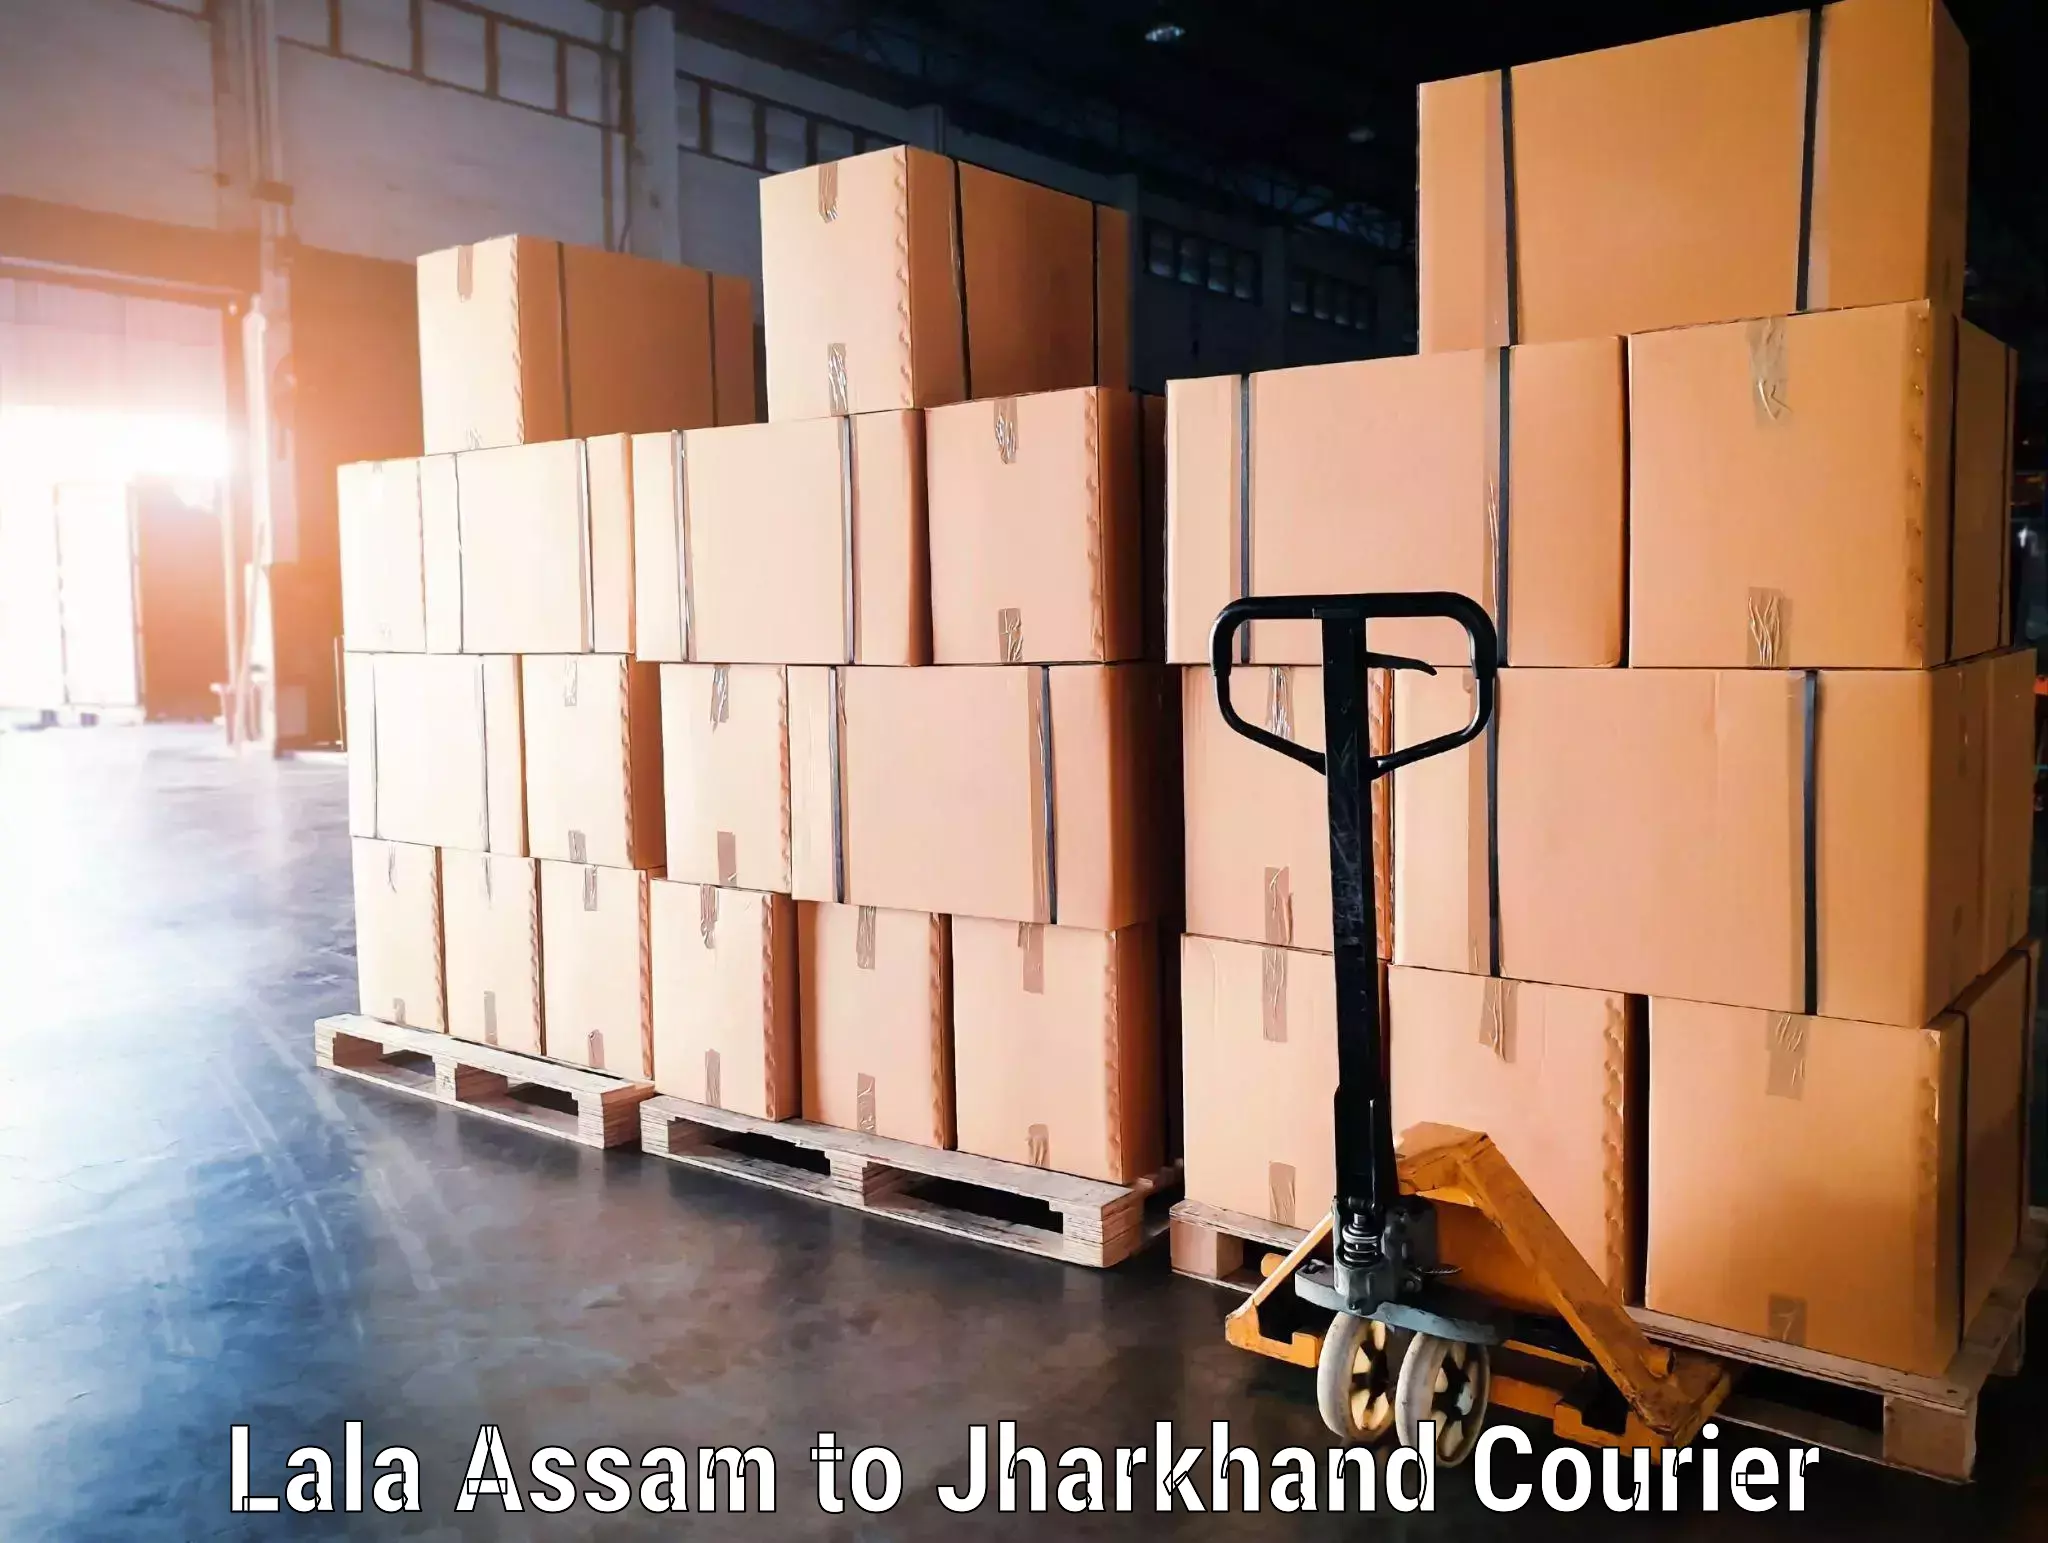 Baggage transport technology Lala Assam to Ranchi